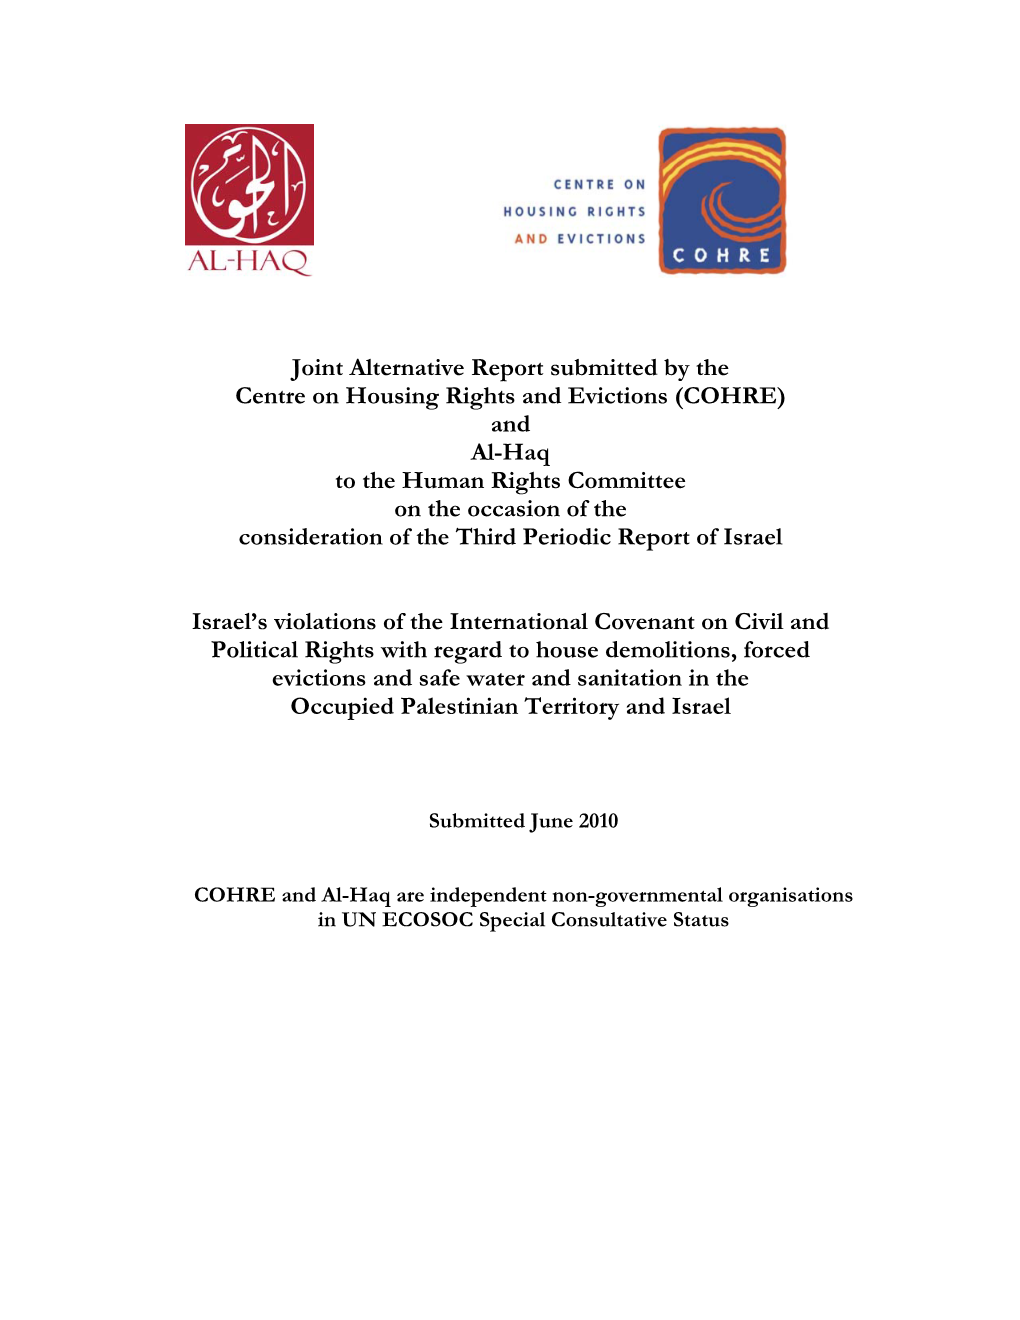 Joint Alternative Report Submitted by The